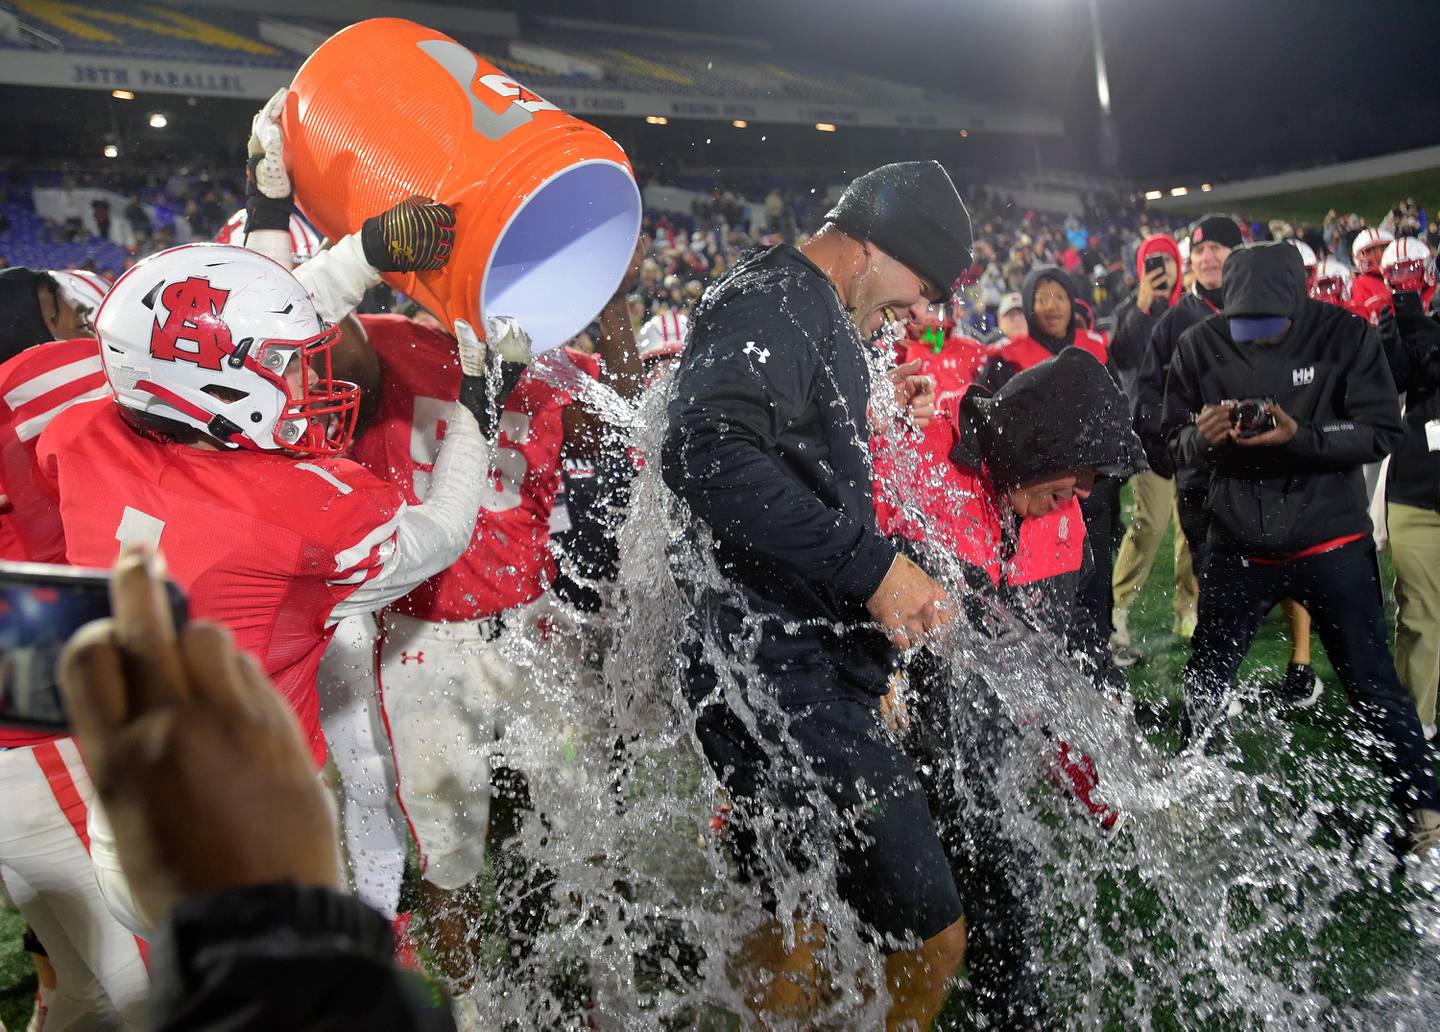 Archbishop SpaldingÕs PJ Poknis, #1, and Dillon Jones, #55, pour water on head coach Kyle Schmitt after the team beat Calvert Hall 34-10 in the MIAA A Conference football championship, Friday, Nov. 18, 2022 at Navy-Marine Corps Memorial Stadium in Annapolis.